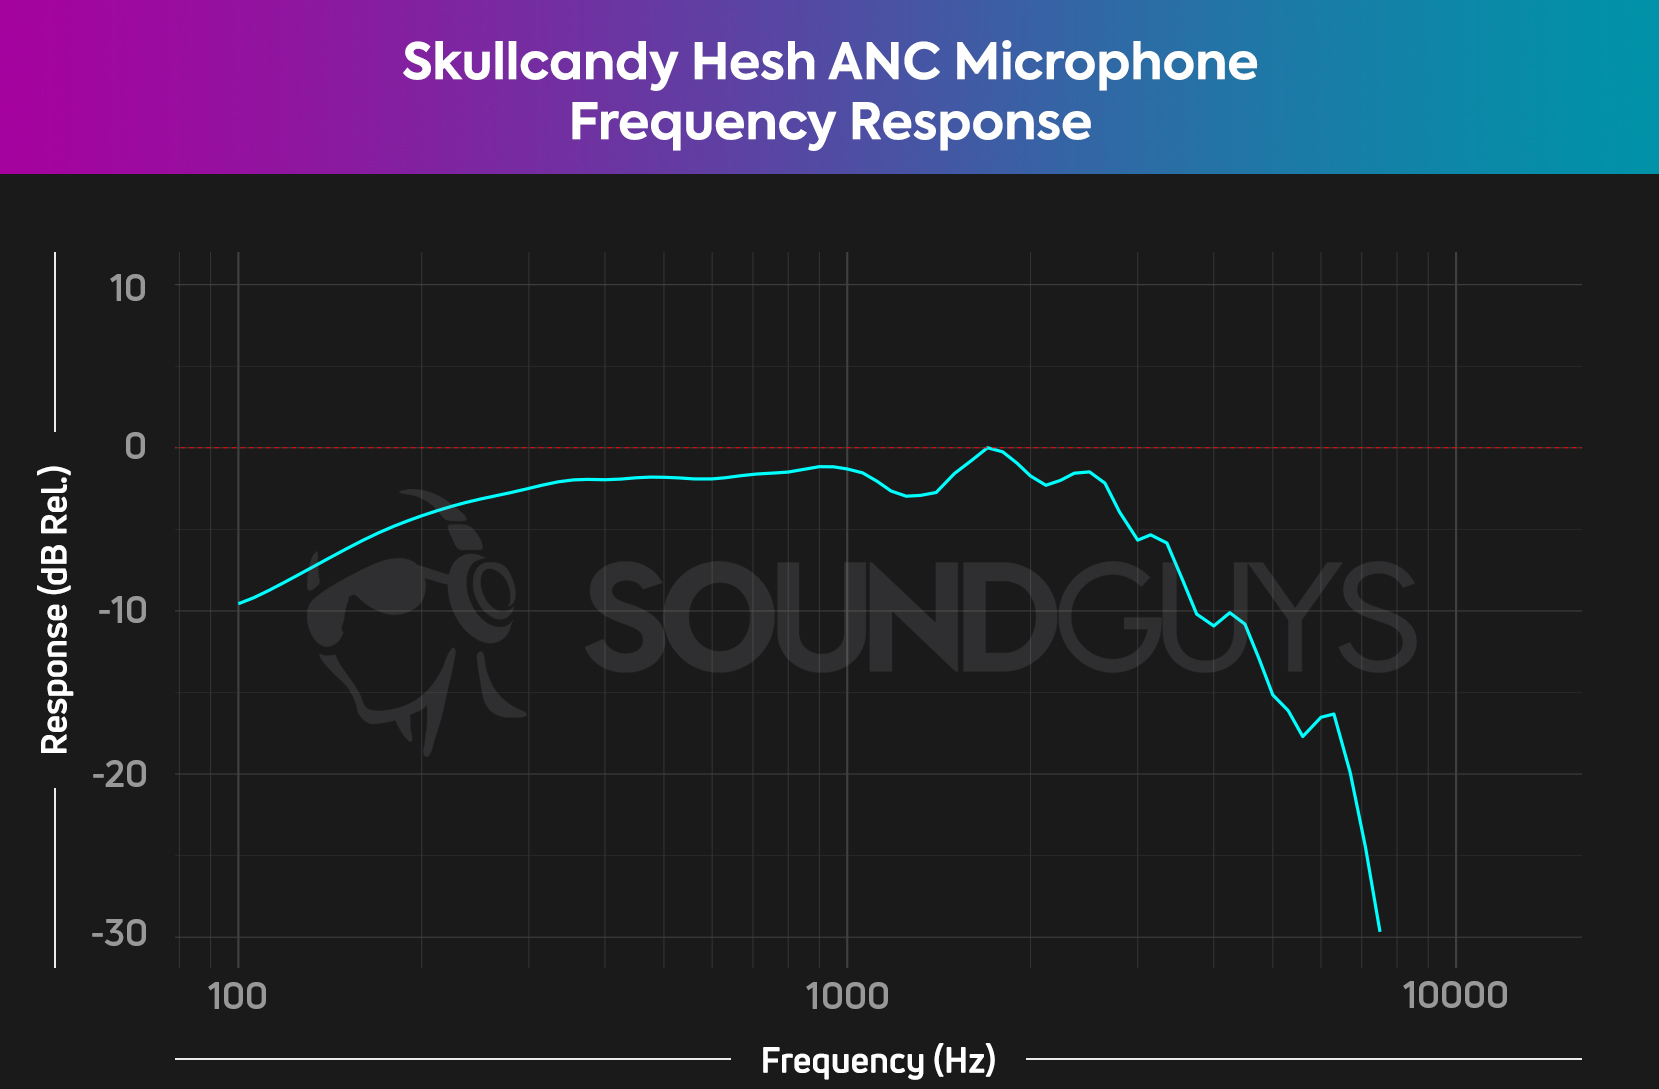 A chart shows the Skullcandy Hesh ANC's microphone performance which is consistent from 300Hz-1kHz.